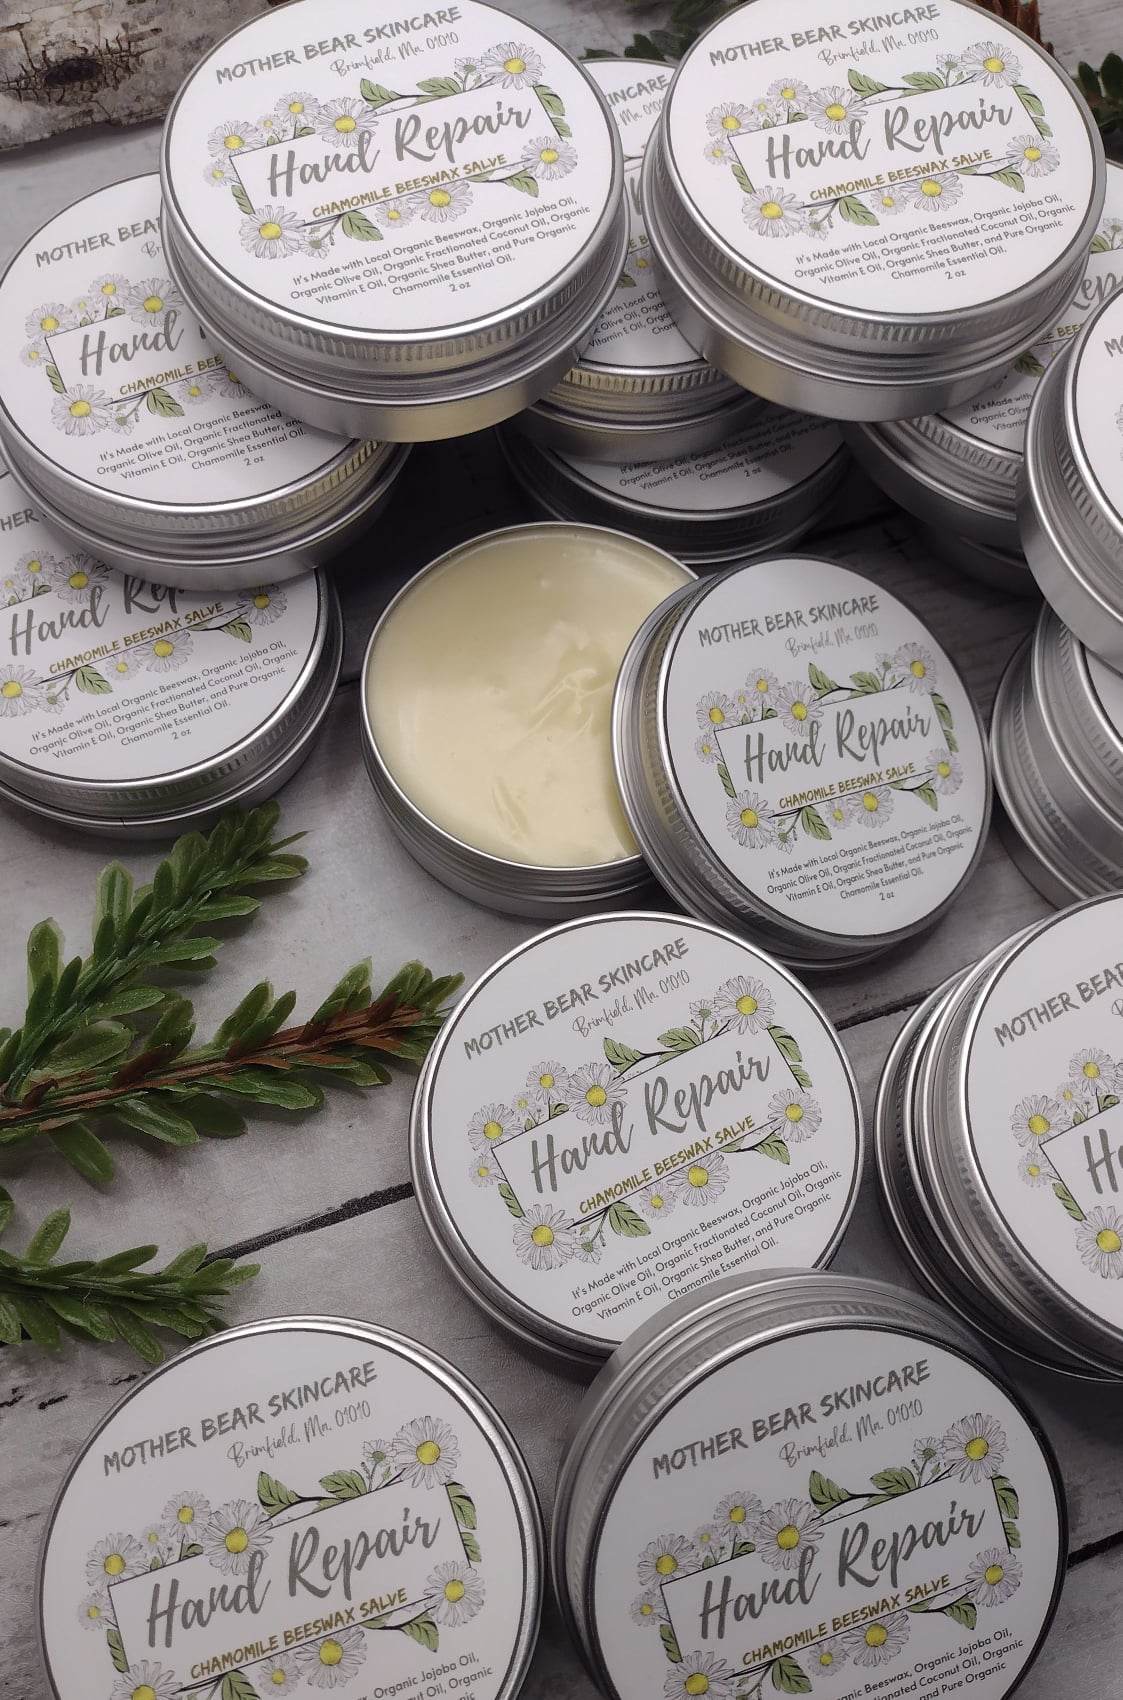 Mother Bear Skincare's Hand Repair Beeswax Salve ~ Chamomile ~ Hand Cream ~ Thick Lotion ~ Eczema Relief